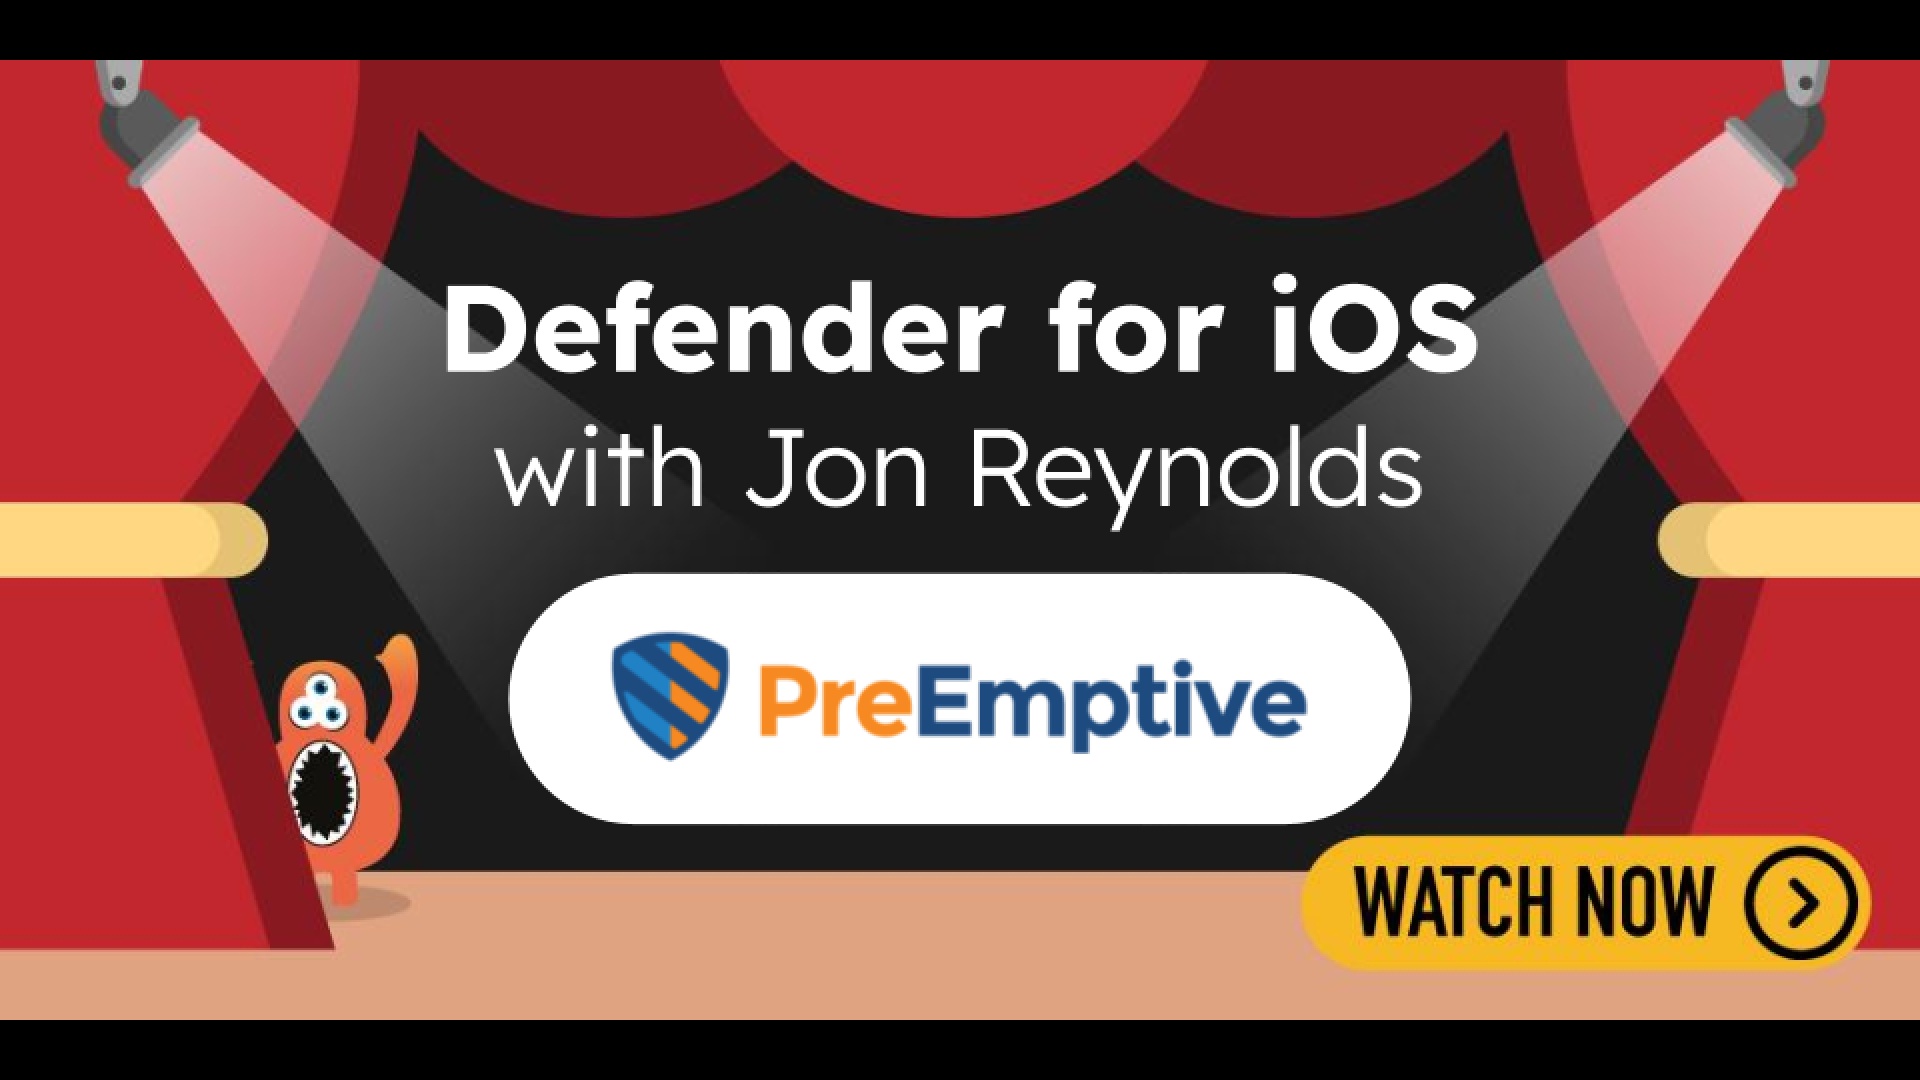 Defender for iOS with Jon Reynolds